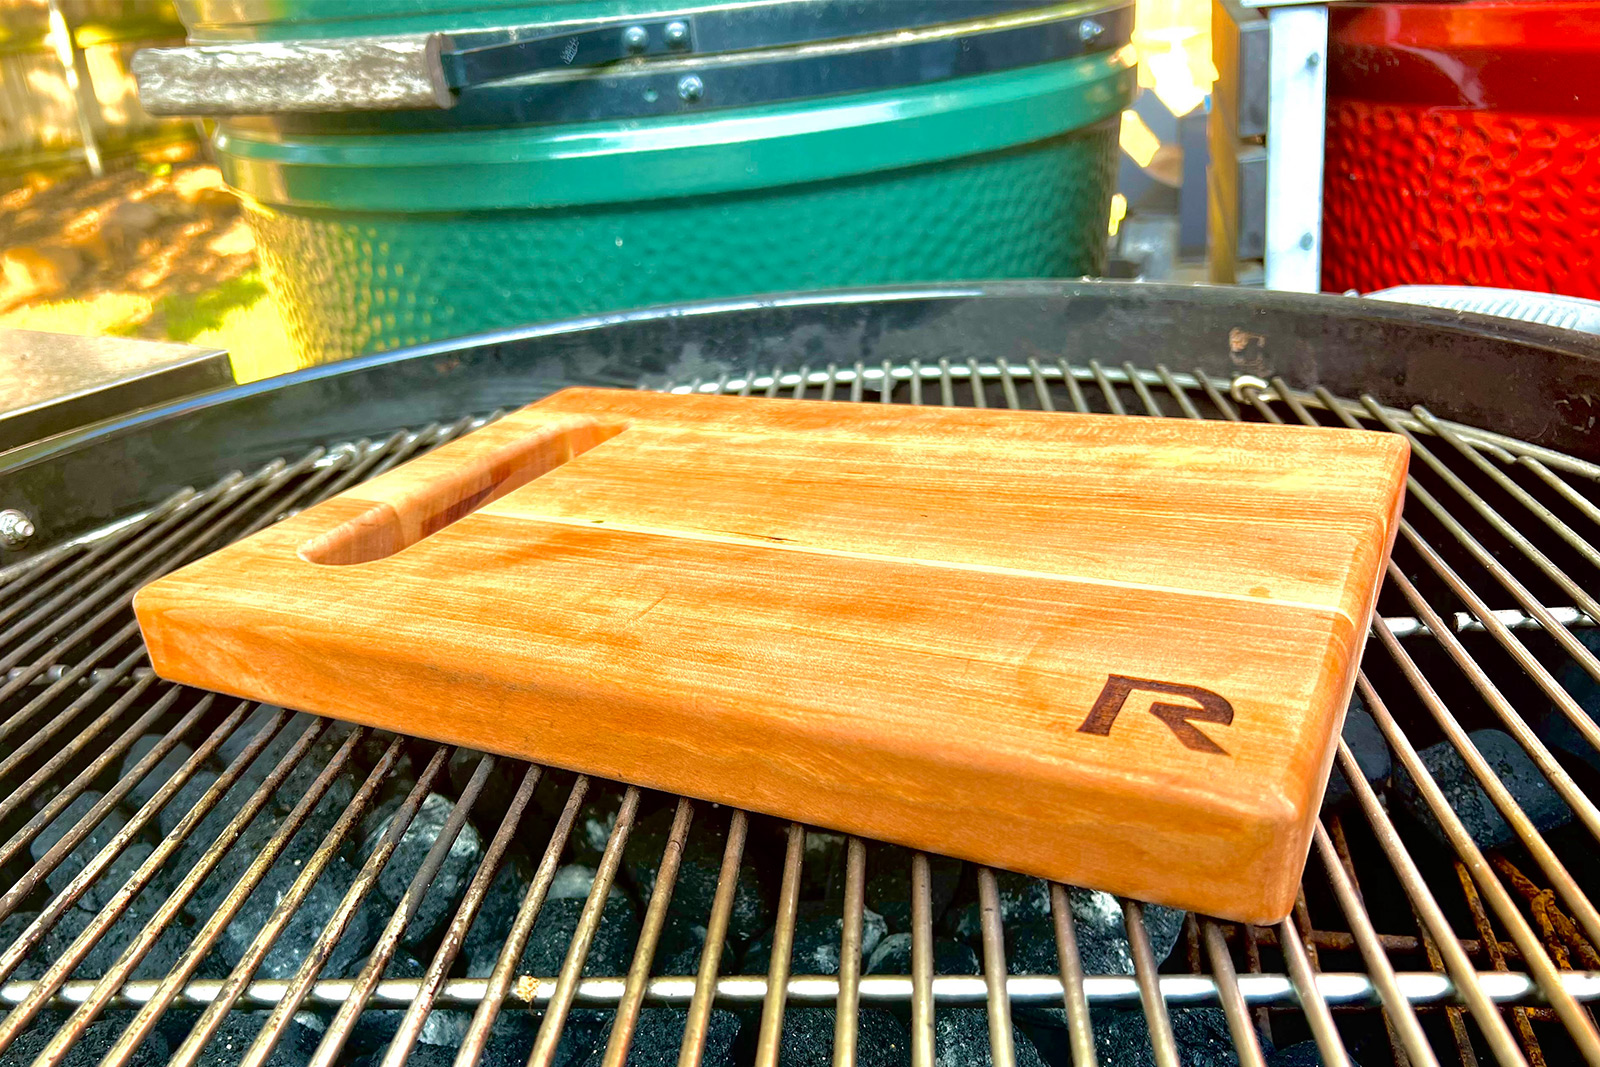 BBQ, cookout, grill cutting board or butcher's block